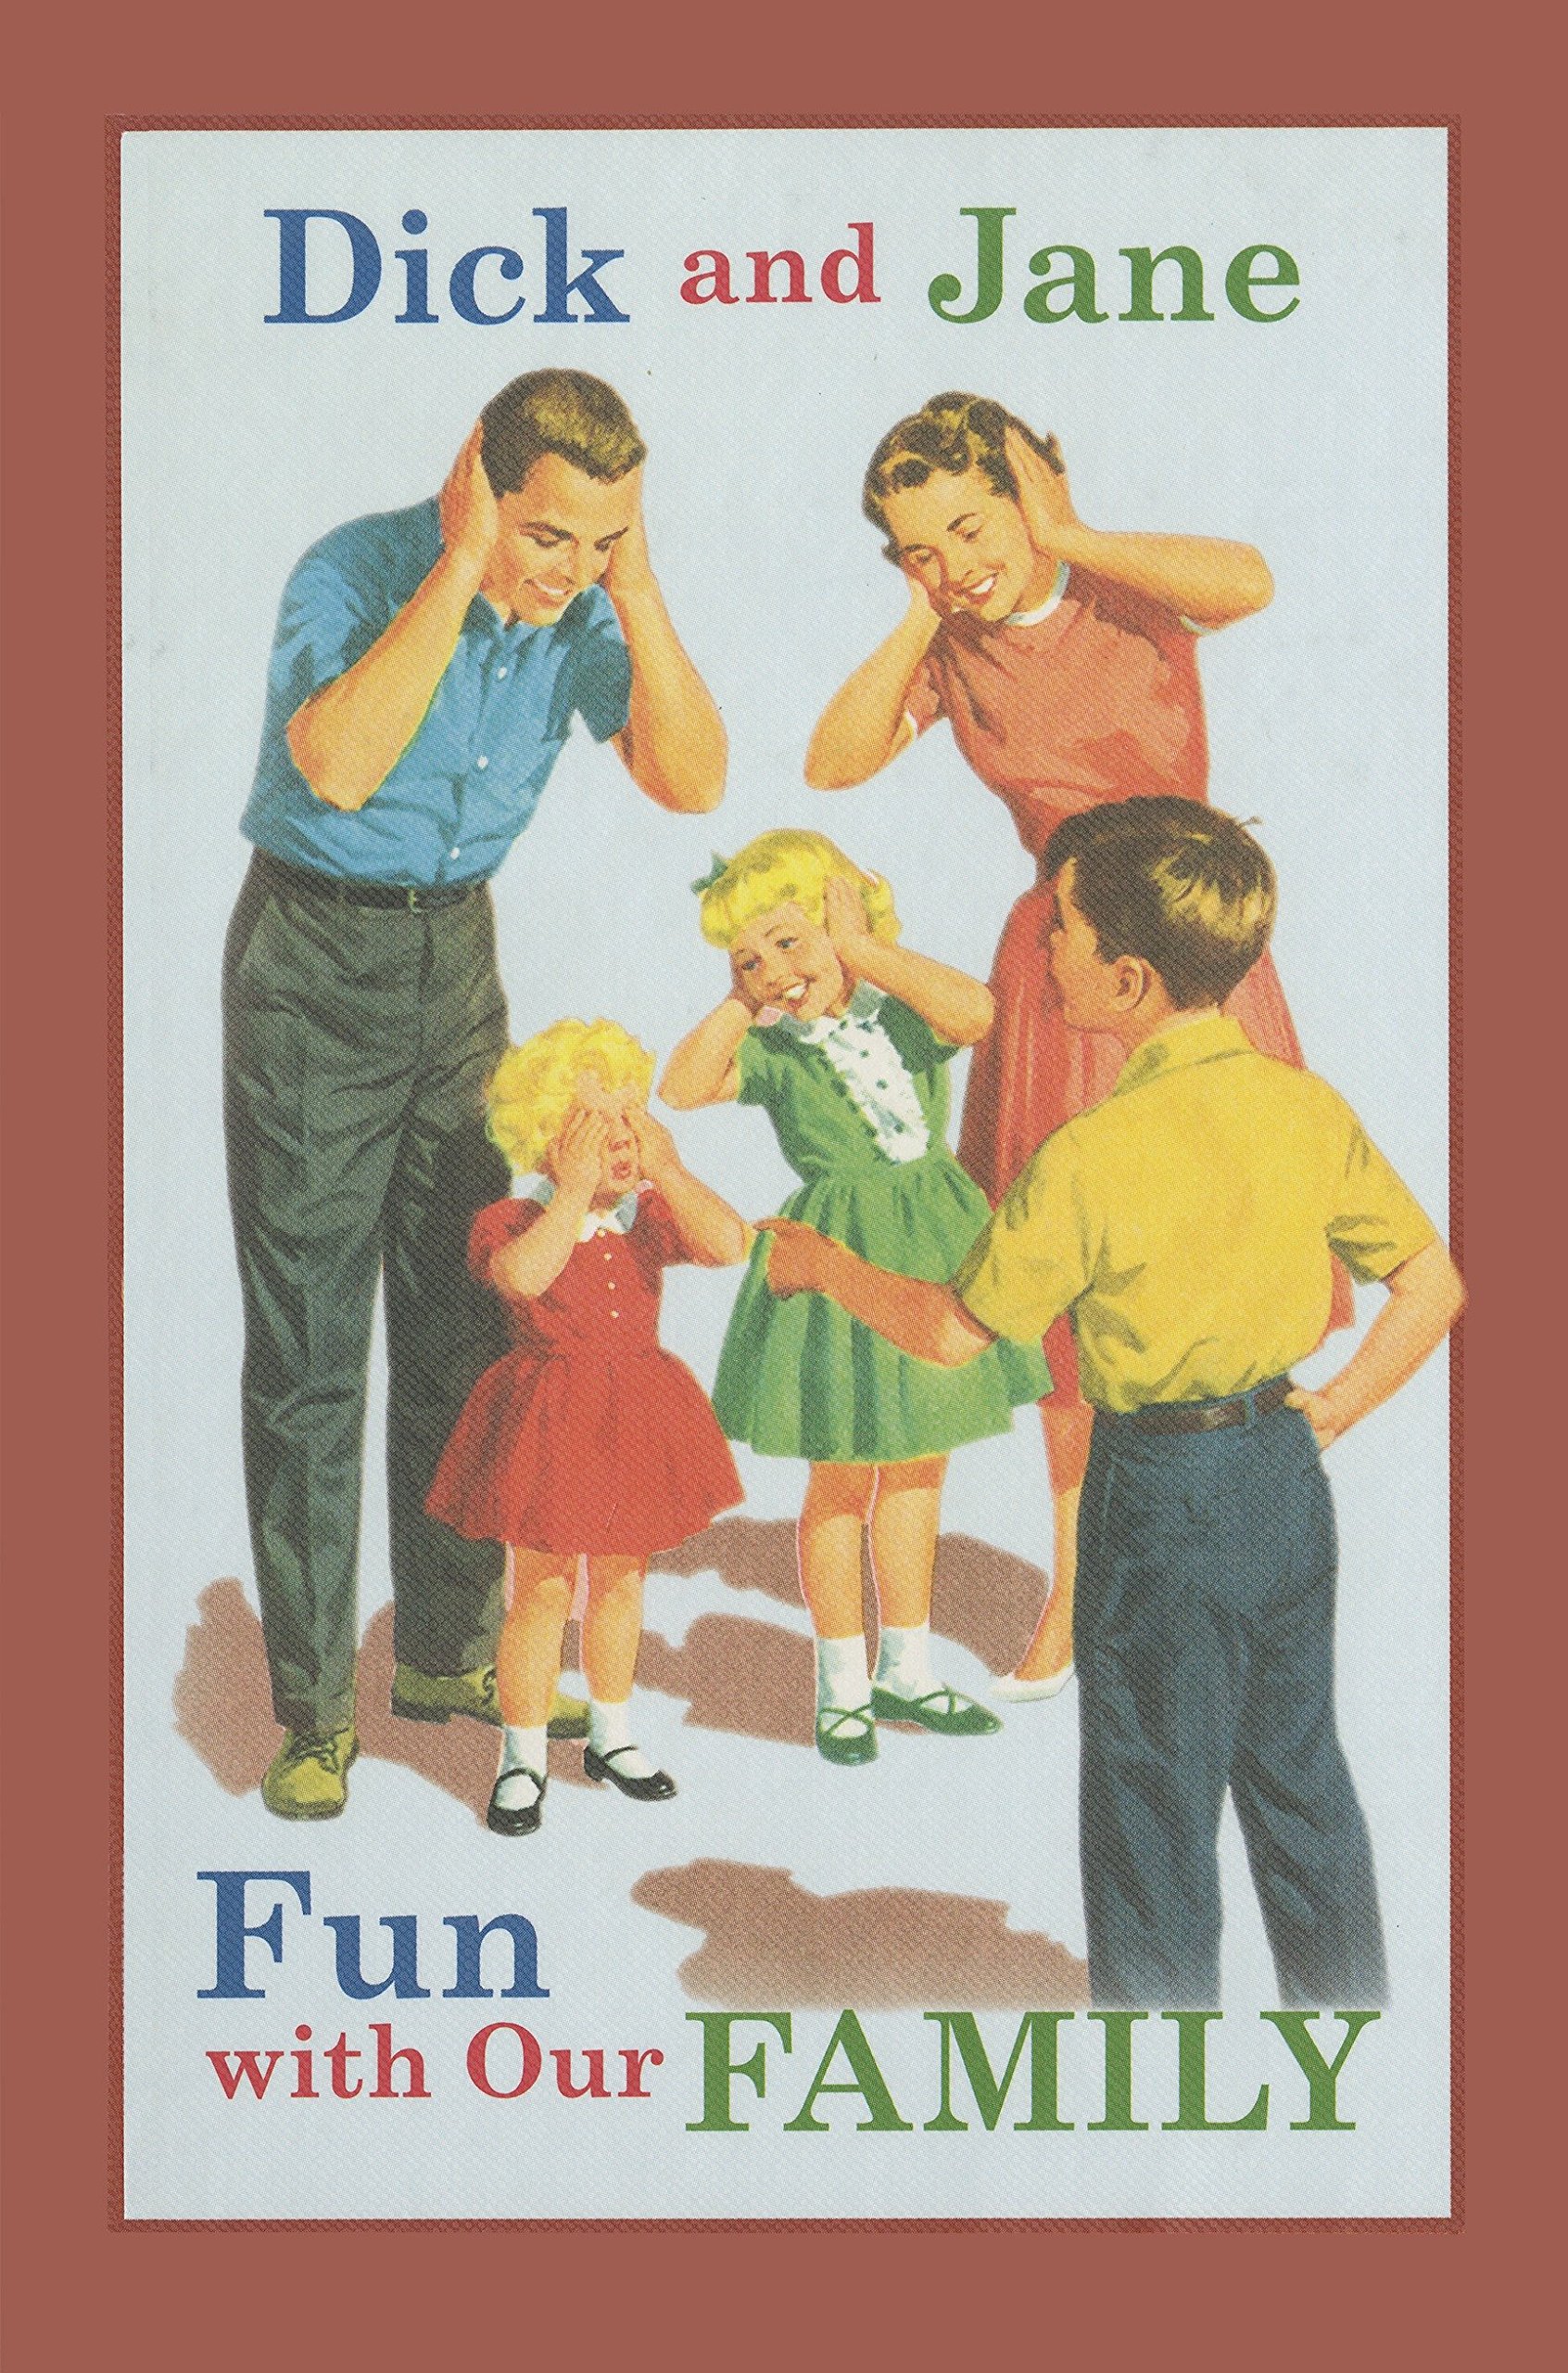 Book Cover Dick and Jane Fun with Our Family